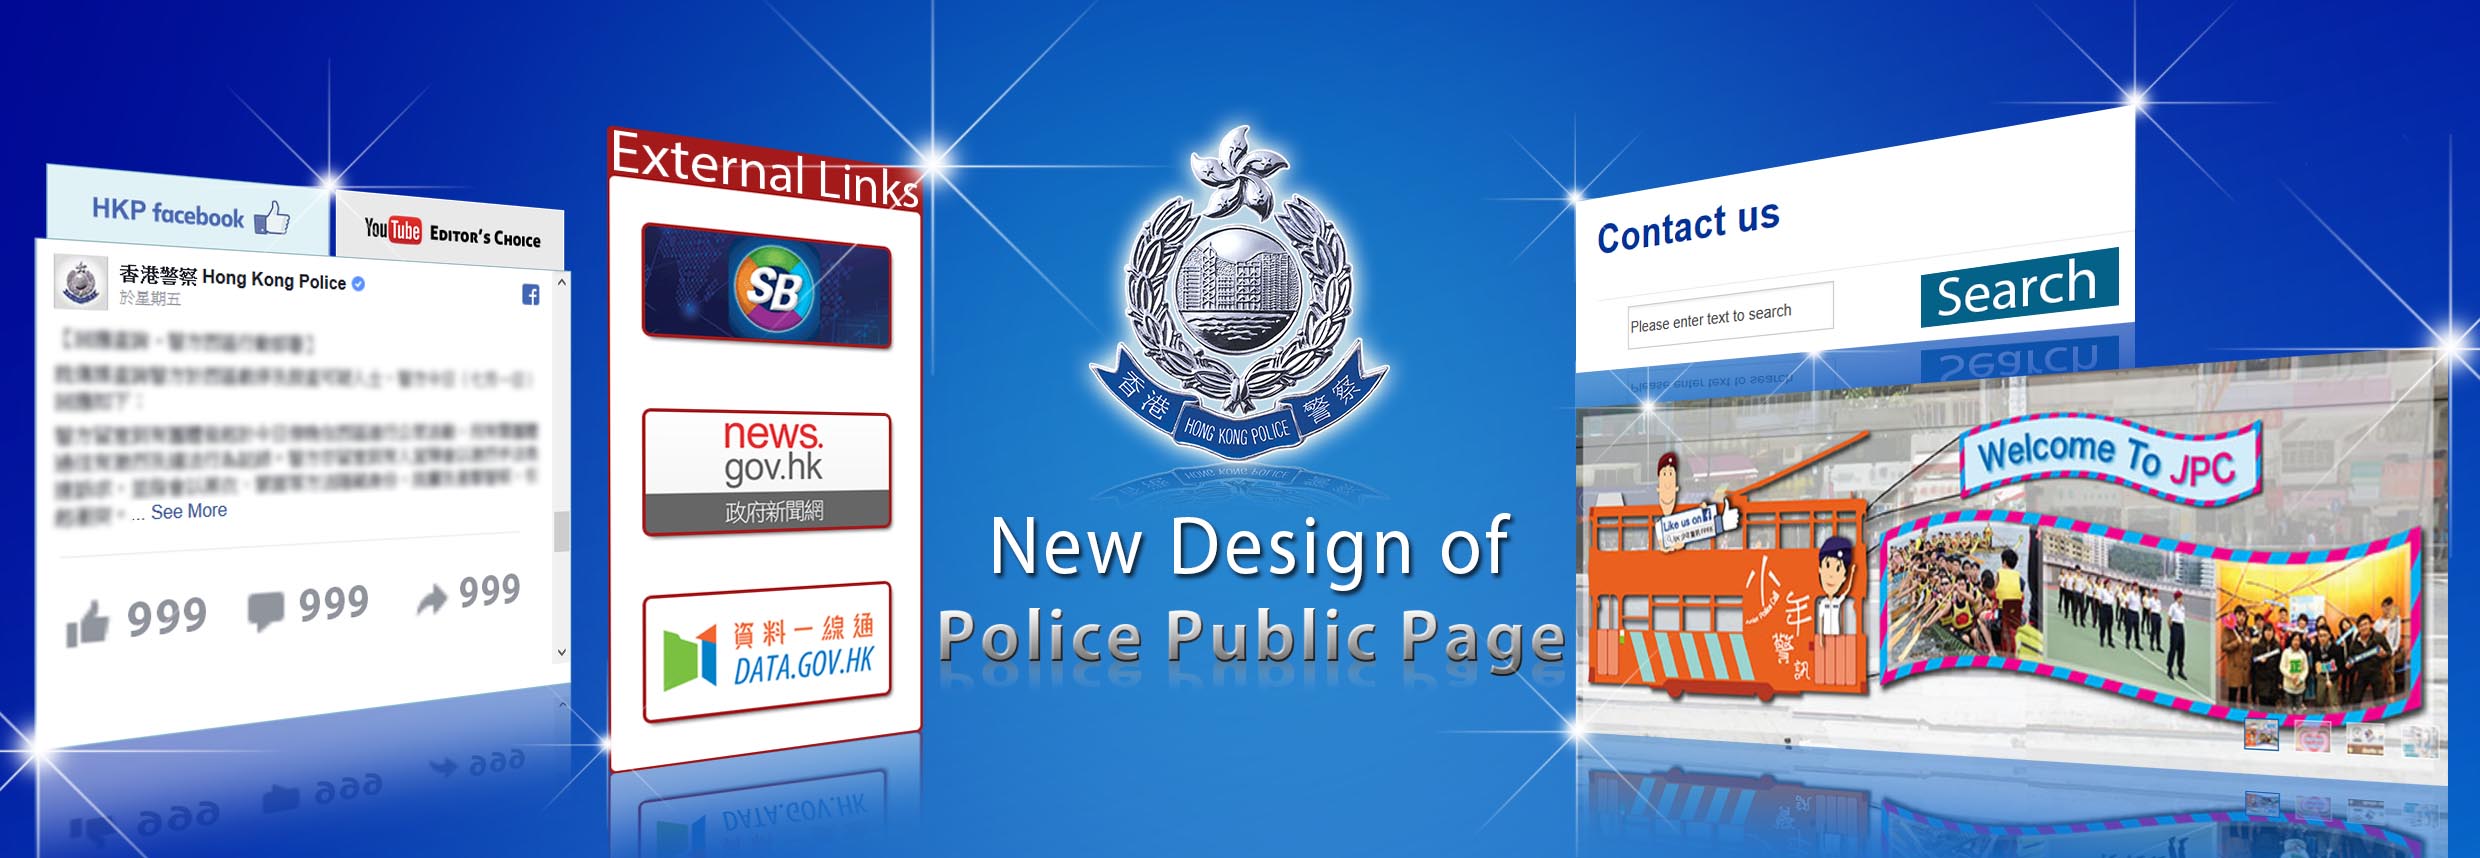 New Design of Police Public Page